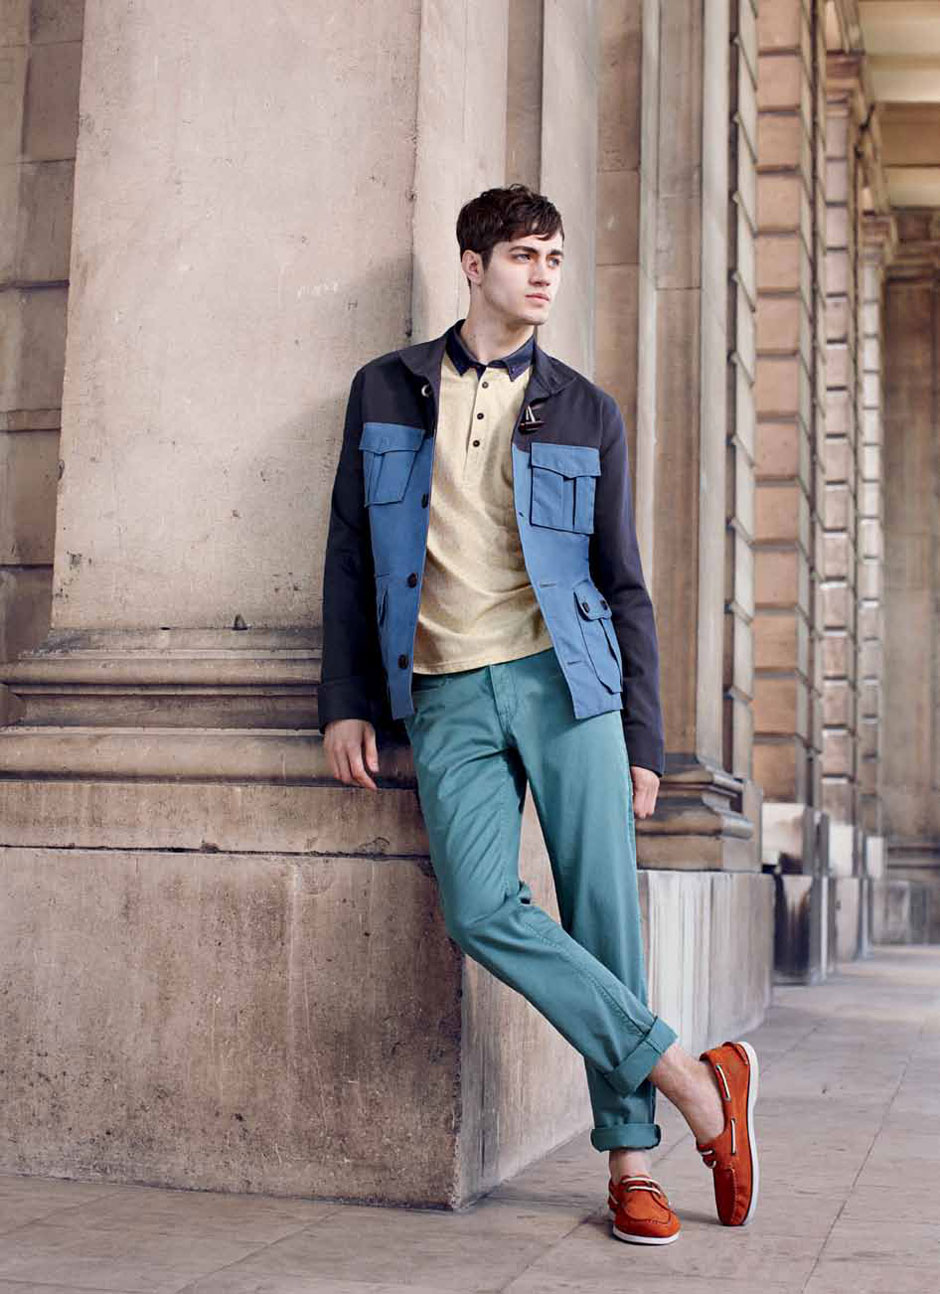 MIKE KAGEE FASHION BLOG : TED BAKER SPRING/SUMMER 2012 LOOKBOOK